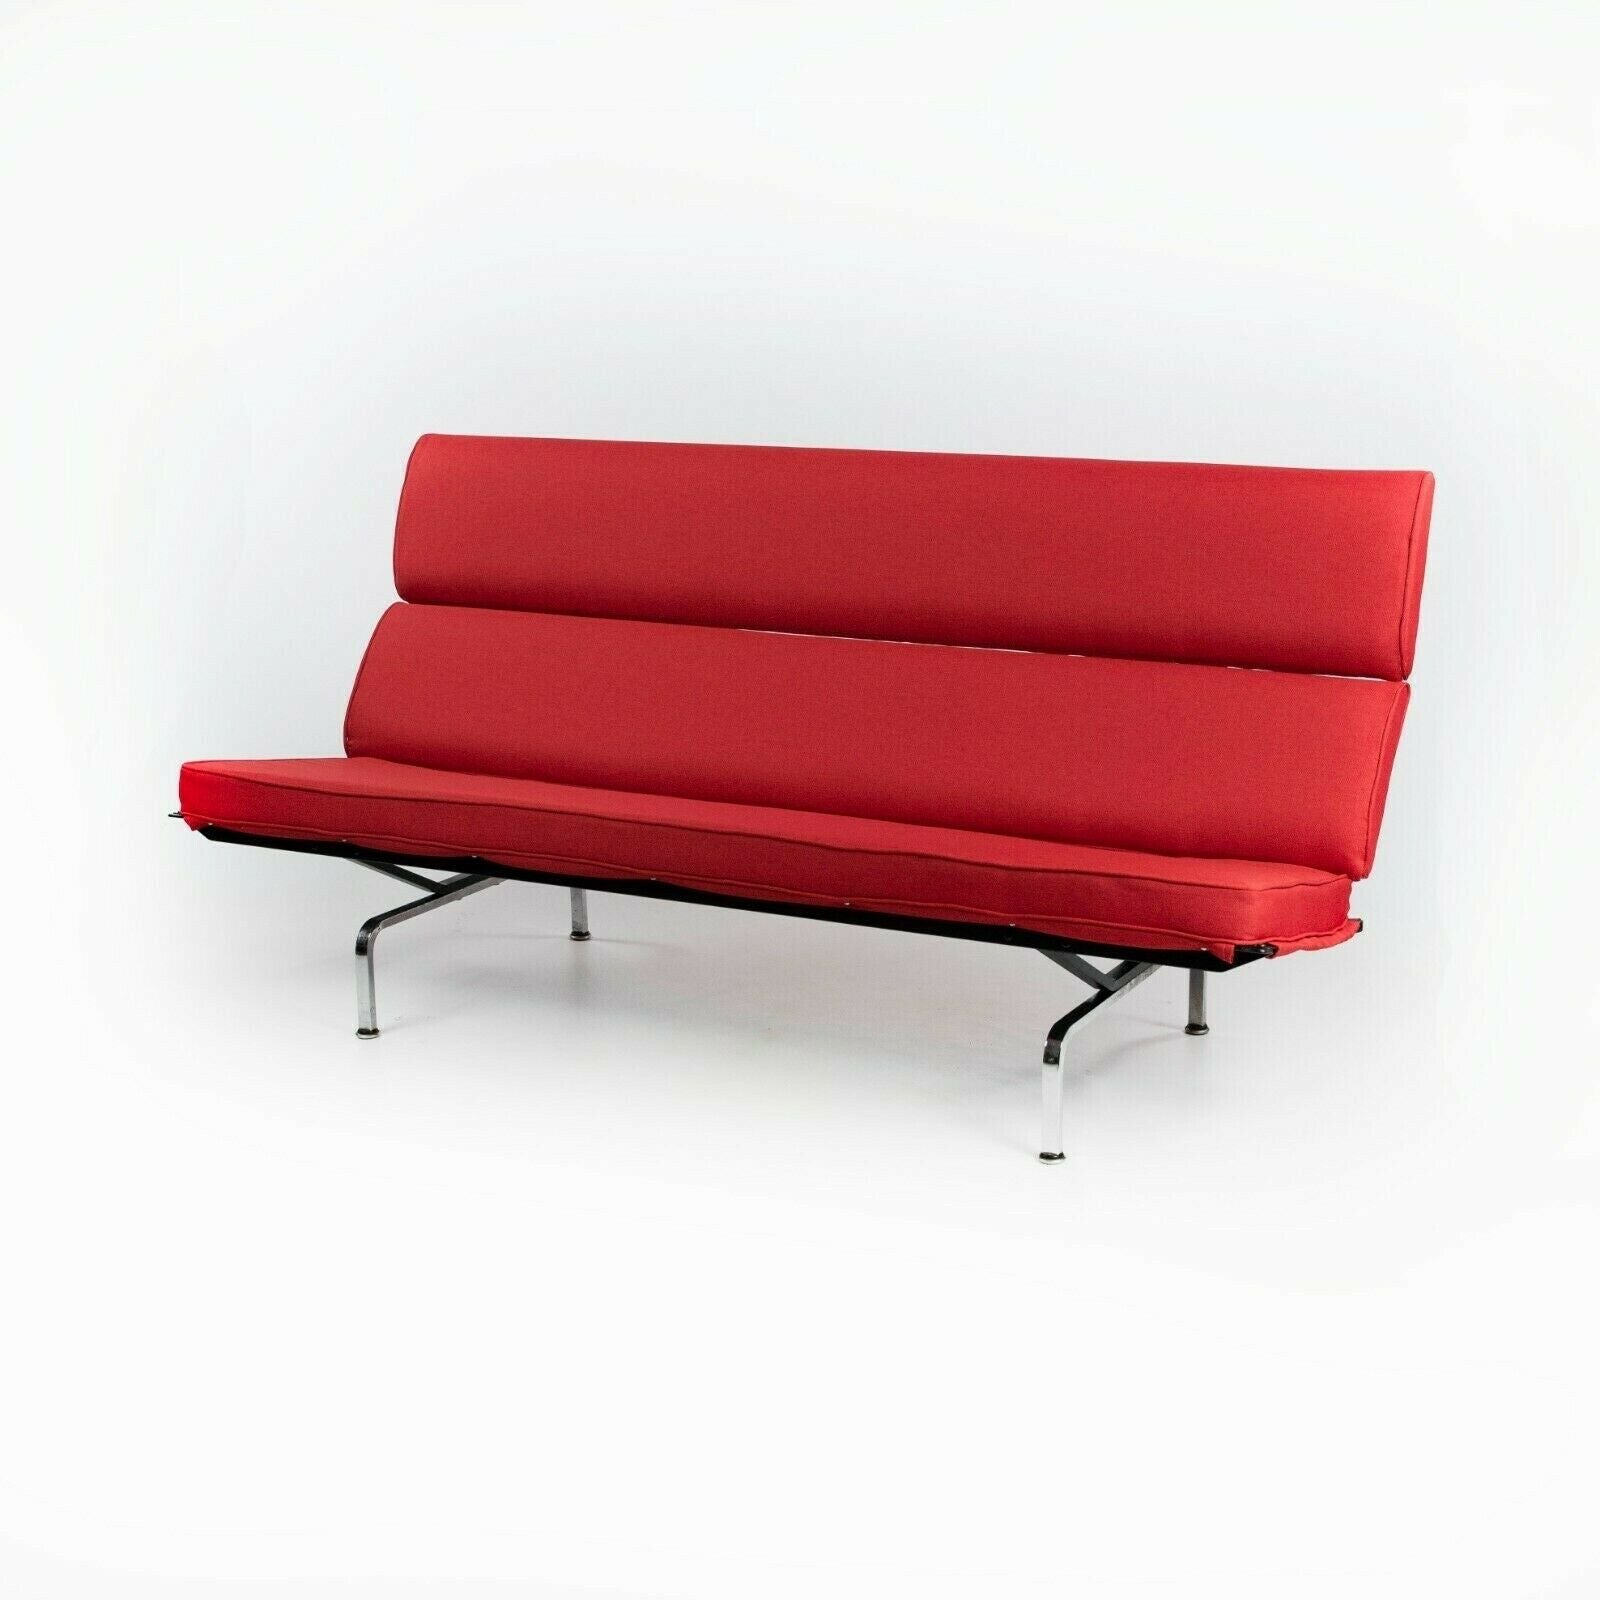 SOLD 1970s Herman Miller Eames Sofa Compact with New Red Knoll Textiles Upholstery